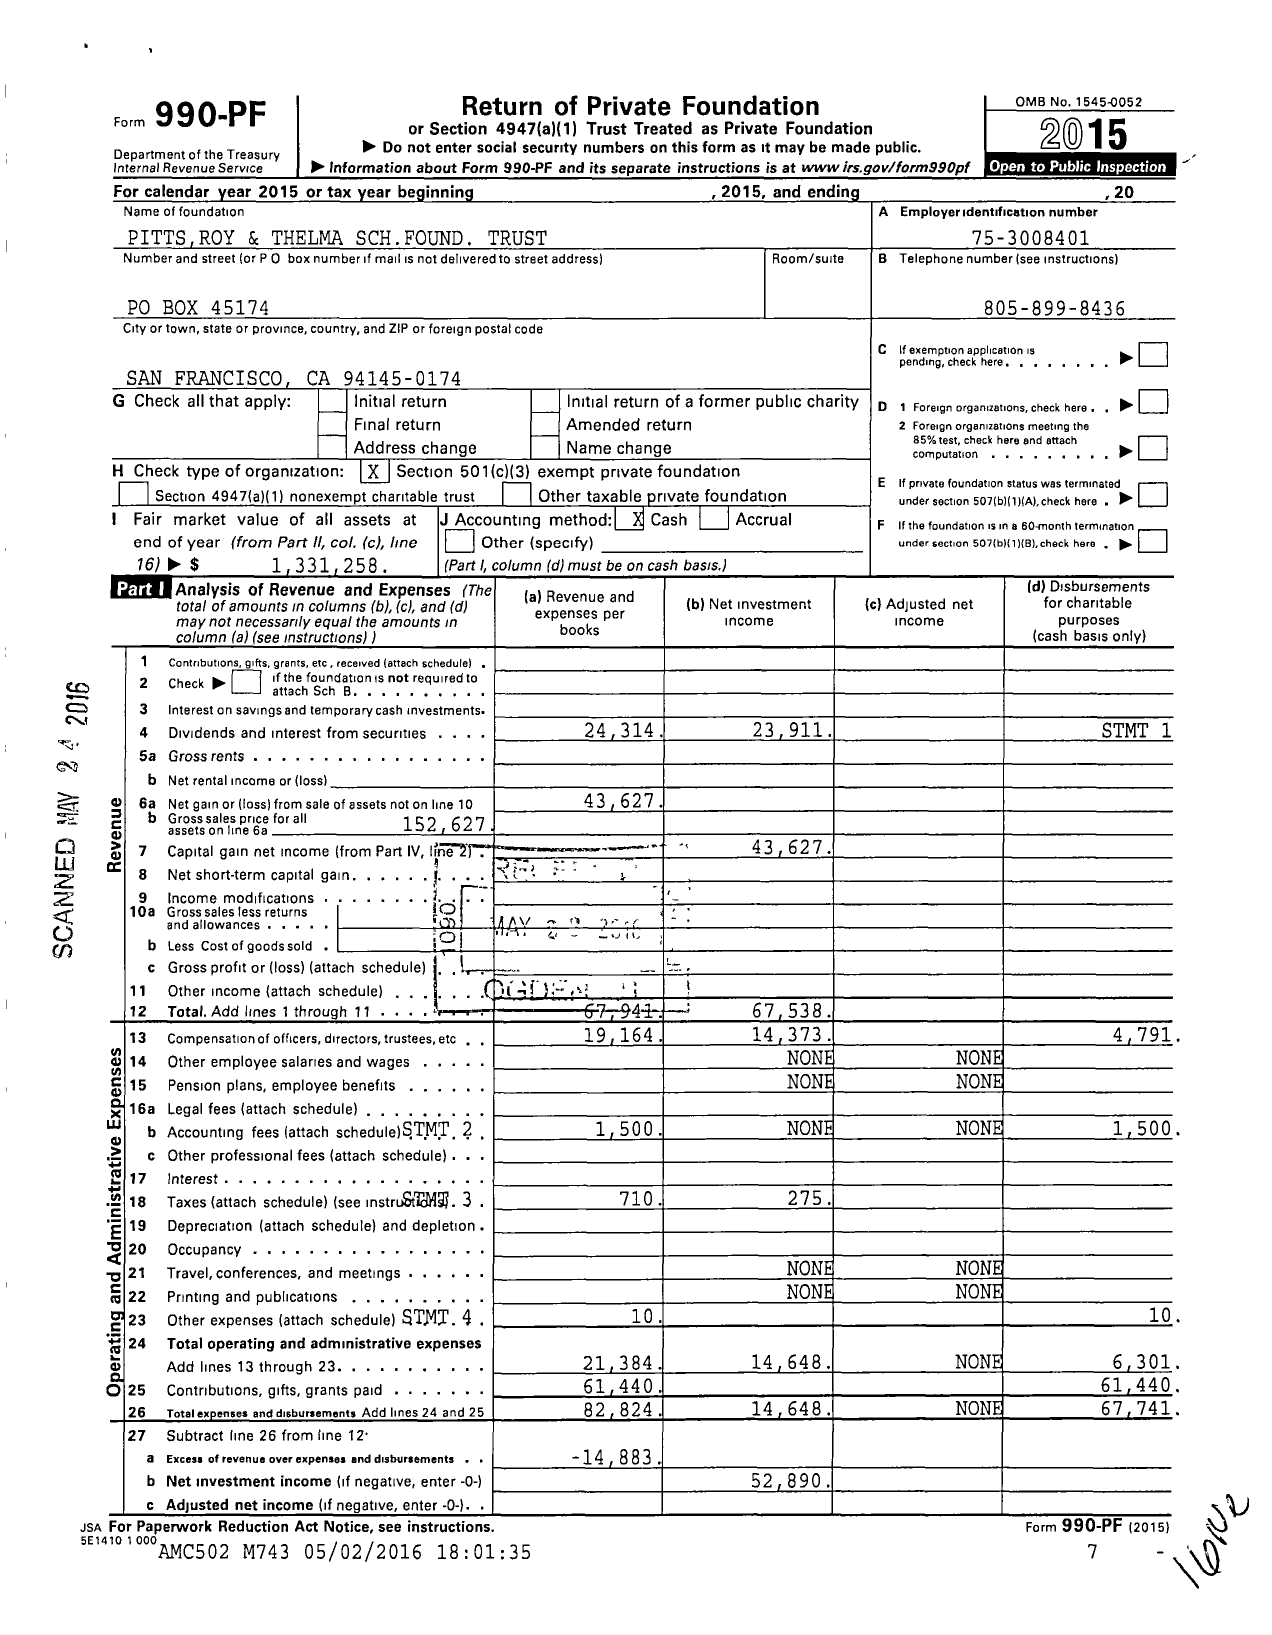 Image of first page of 2015 Form 990PF for Pittsroy and Thelma Schfound Trust